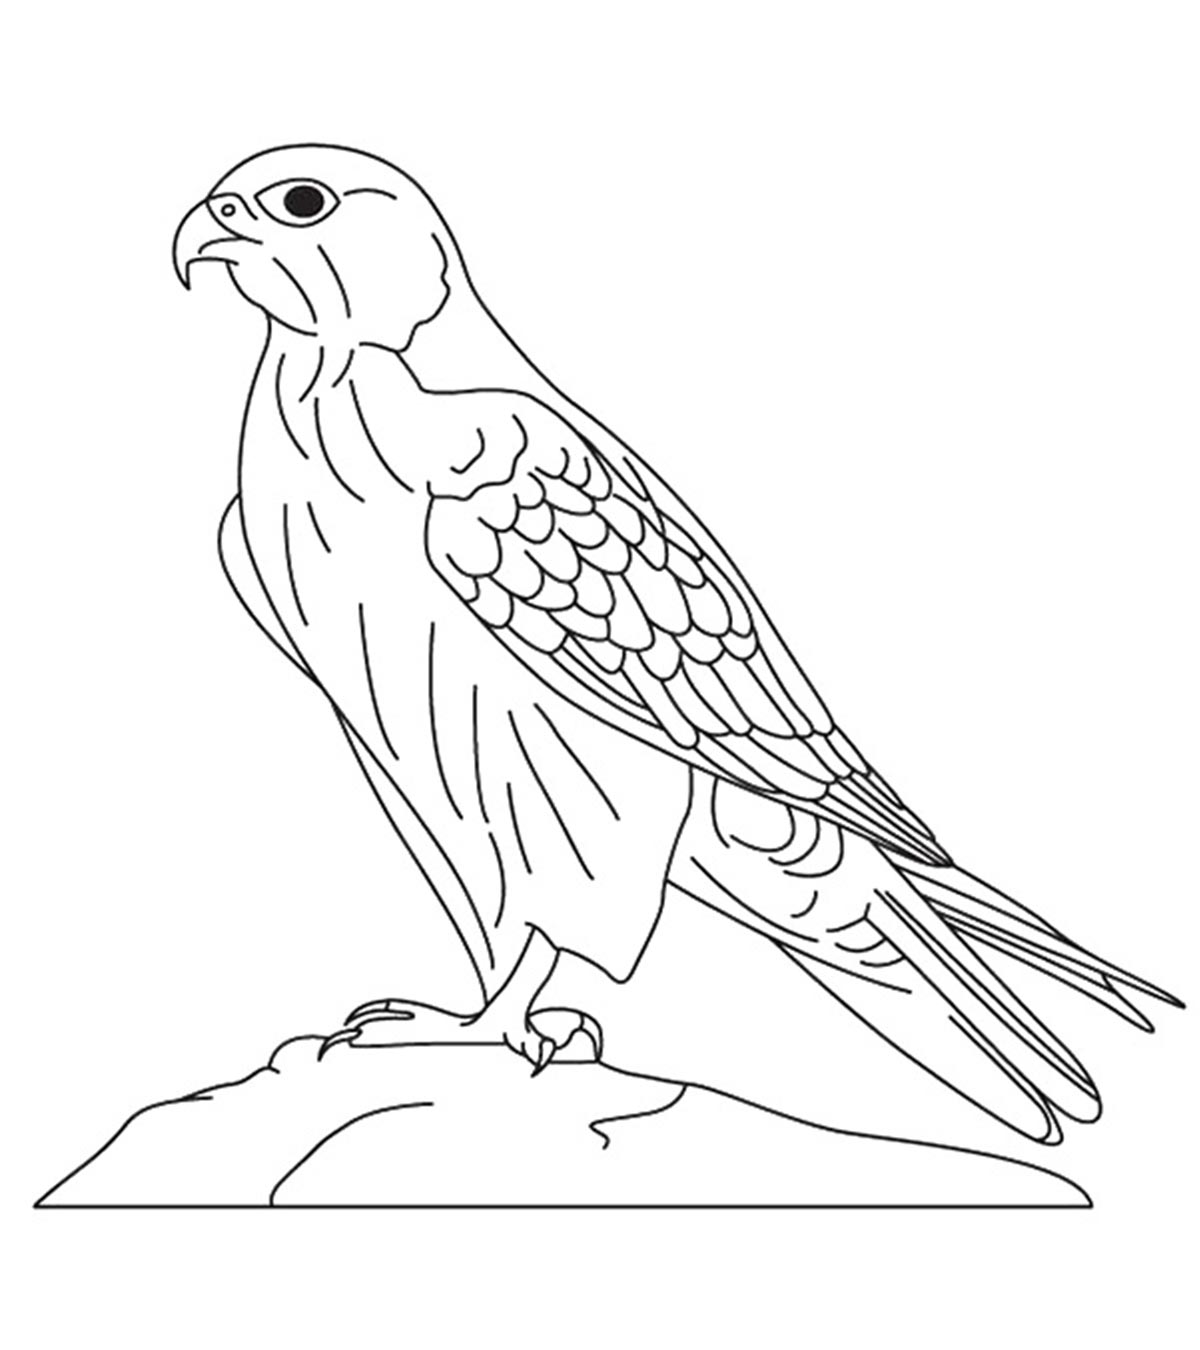 10 Printable Falcon Coloring Pages For Toddlers_image